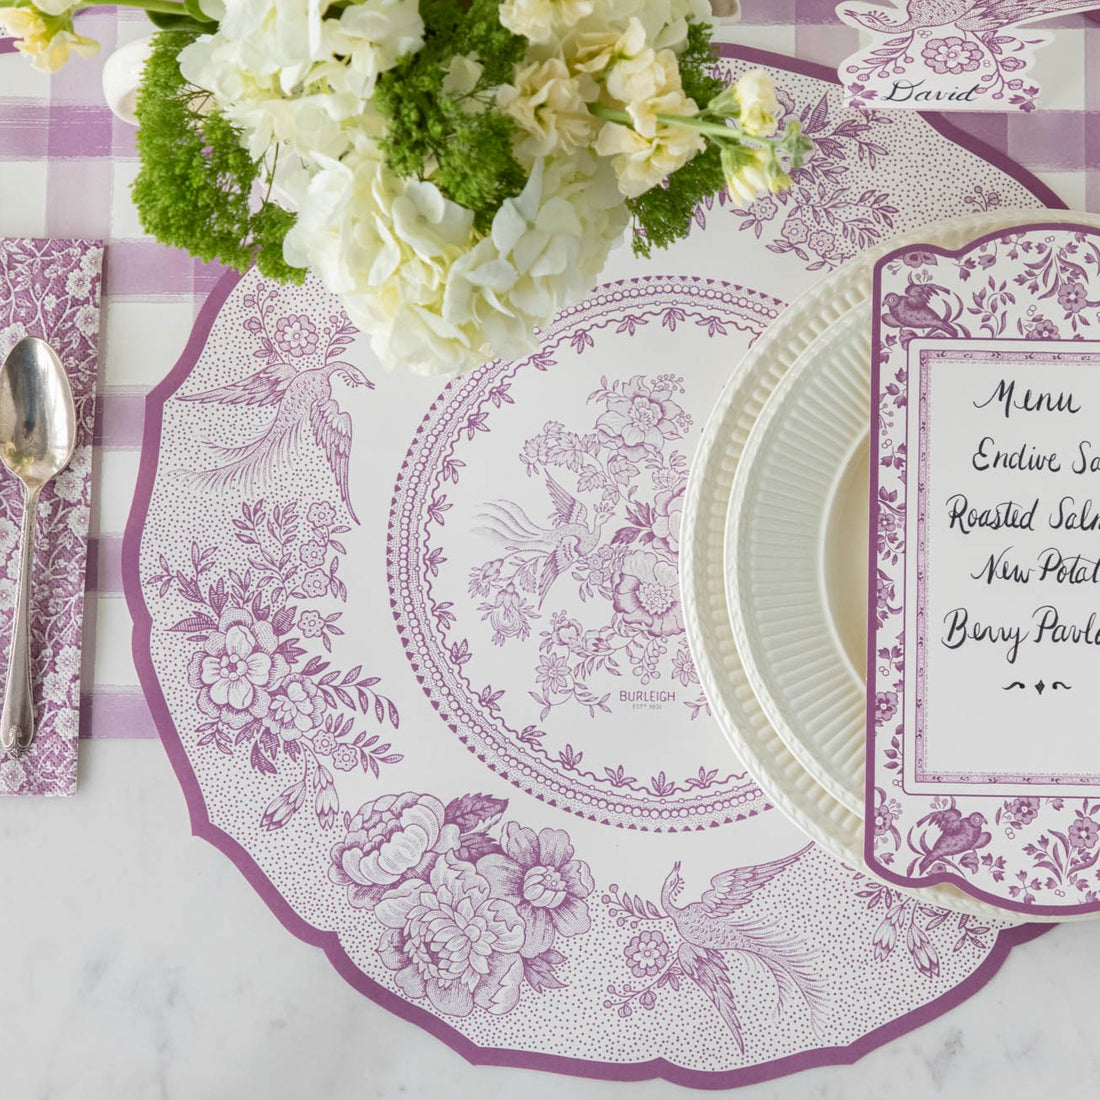 A tablescape featuring a purple and white tablecloth adorned with the Hester &amp; Cook Die-cut Lilac Asiatic Pheasants Placemats.